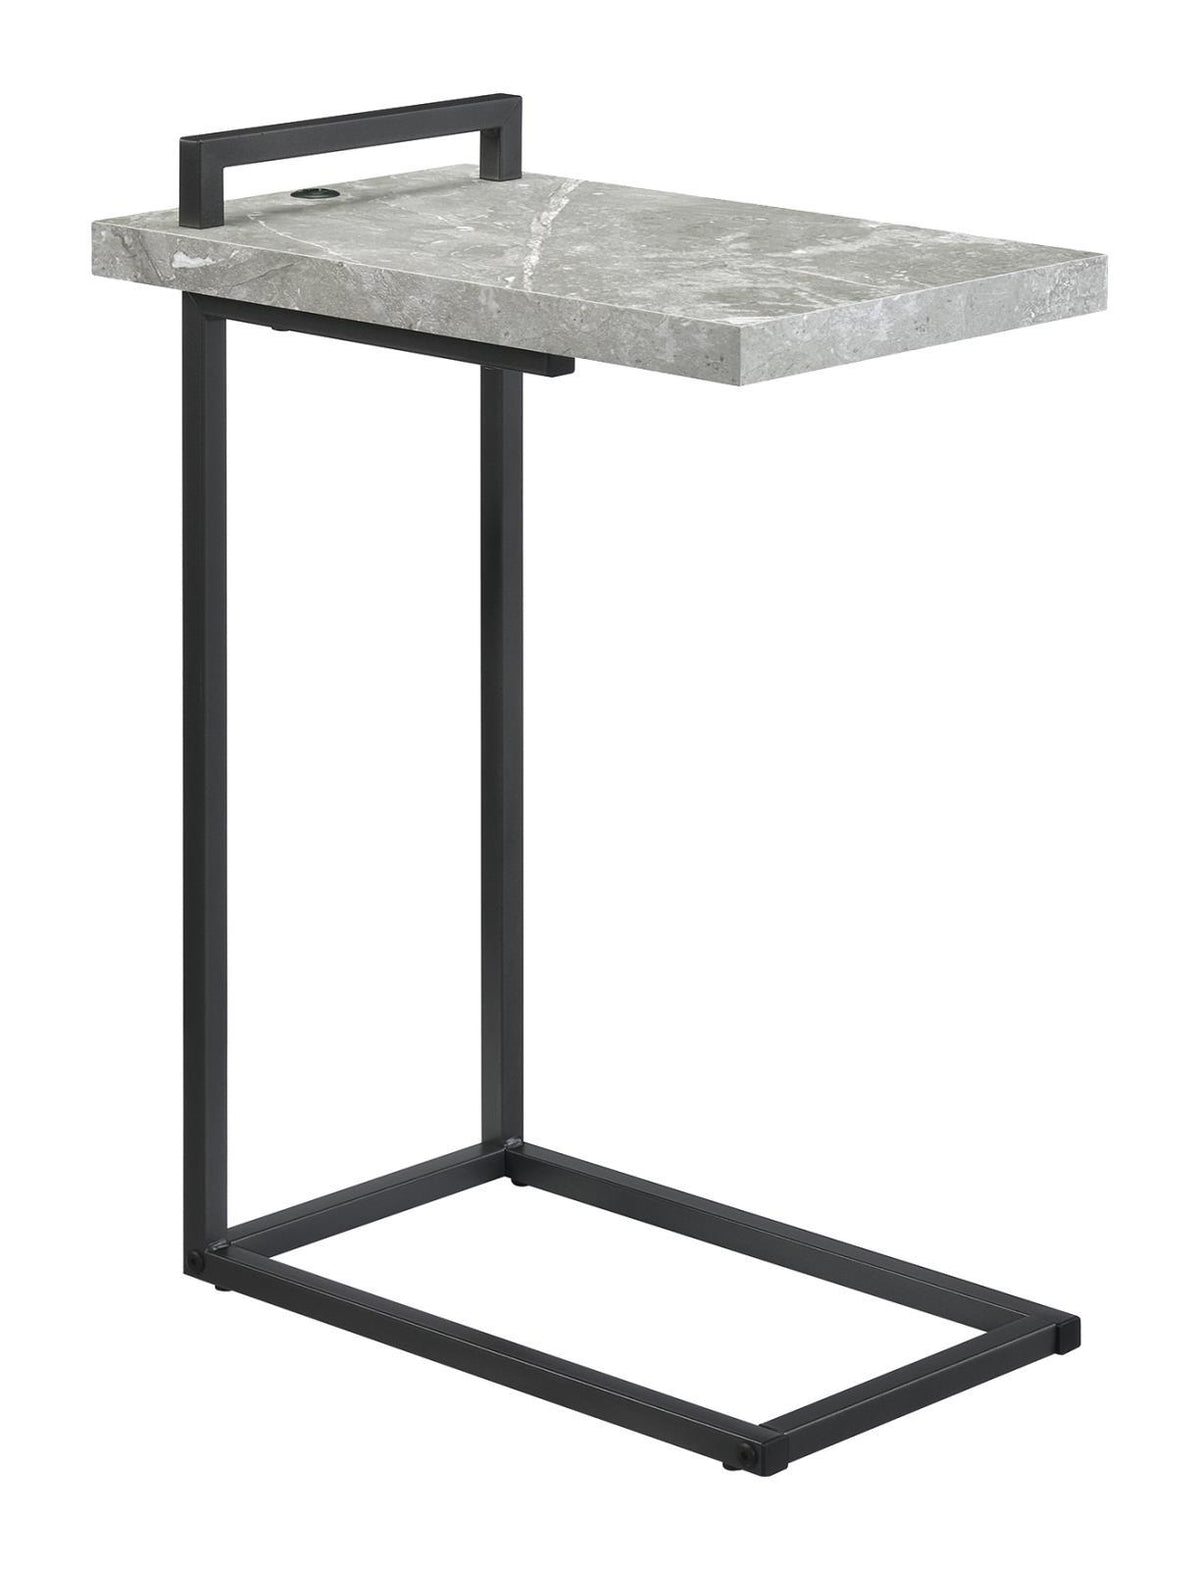 Maxwell C-shaped Accent Table Cement and Gunmetal - Half Price Furniture